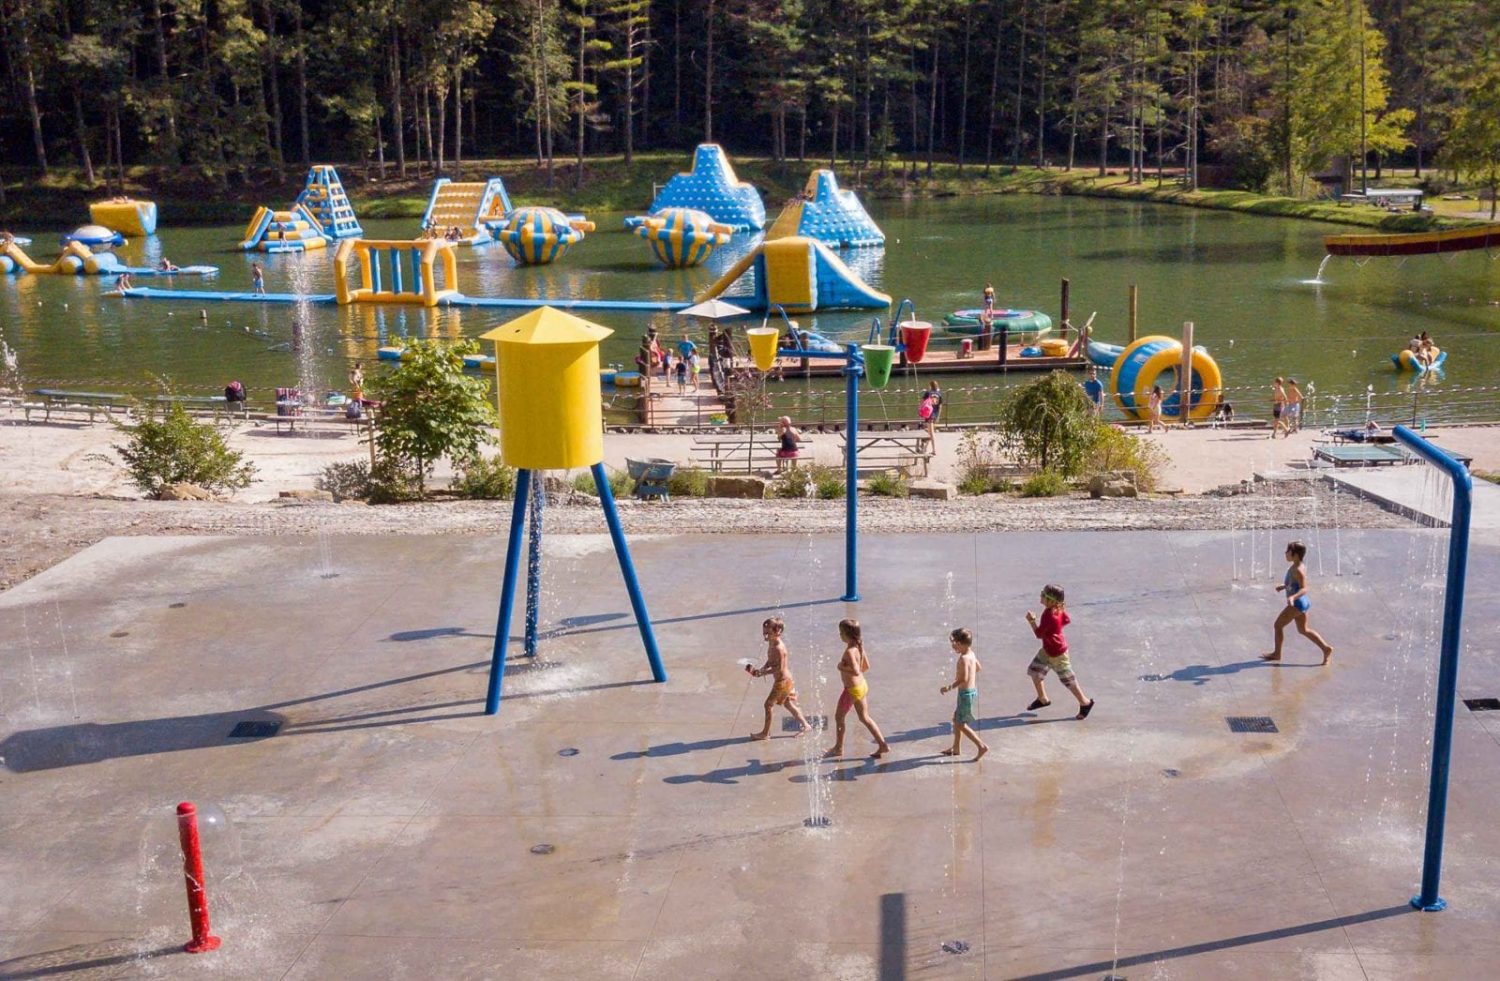 An aerial view of the splash pad at ACE Adventure Resorts water park in west virginia.